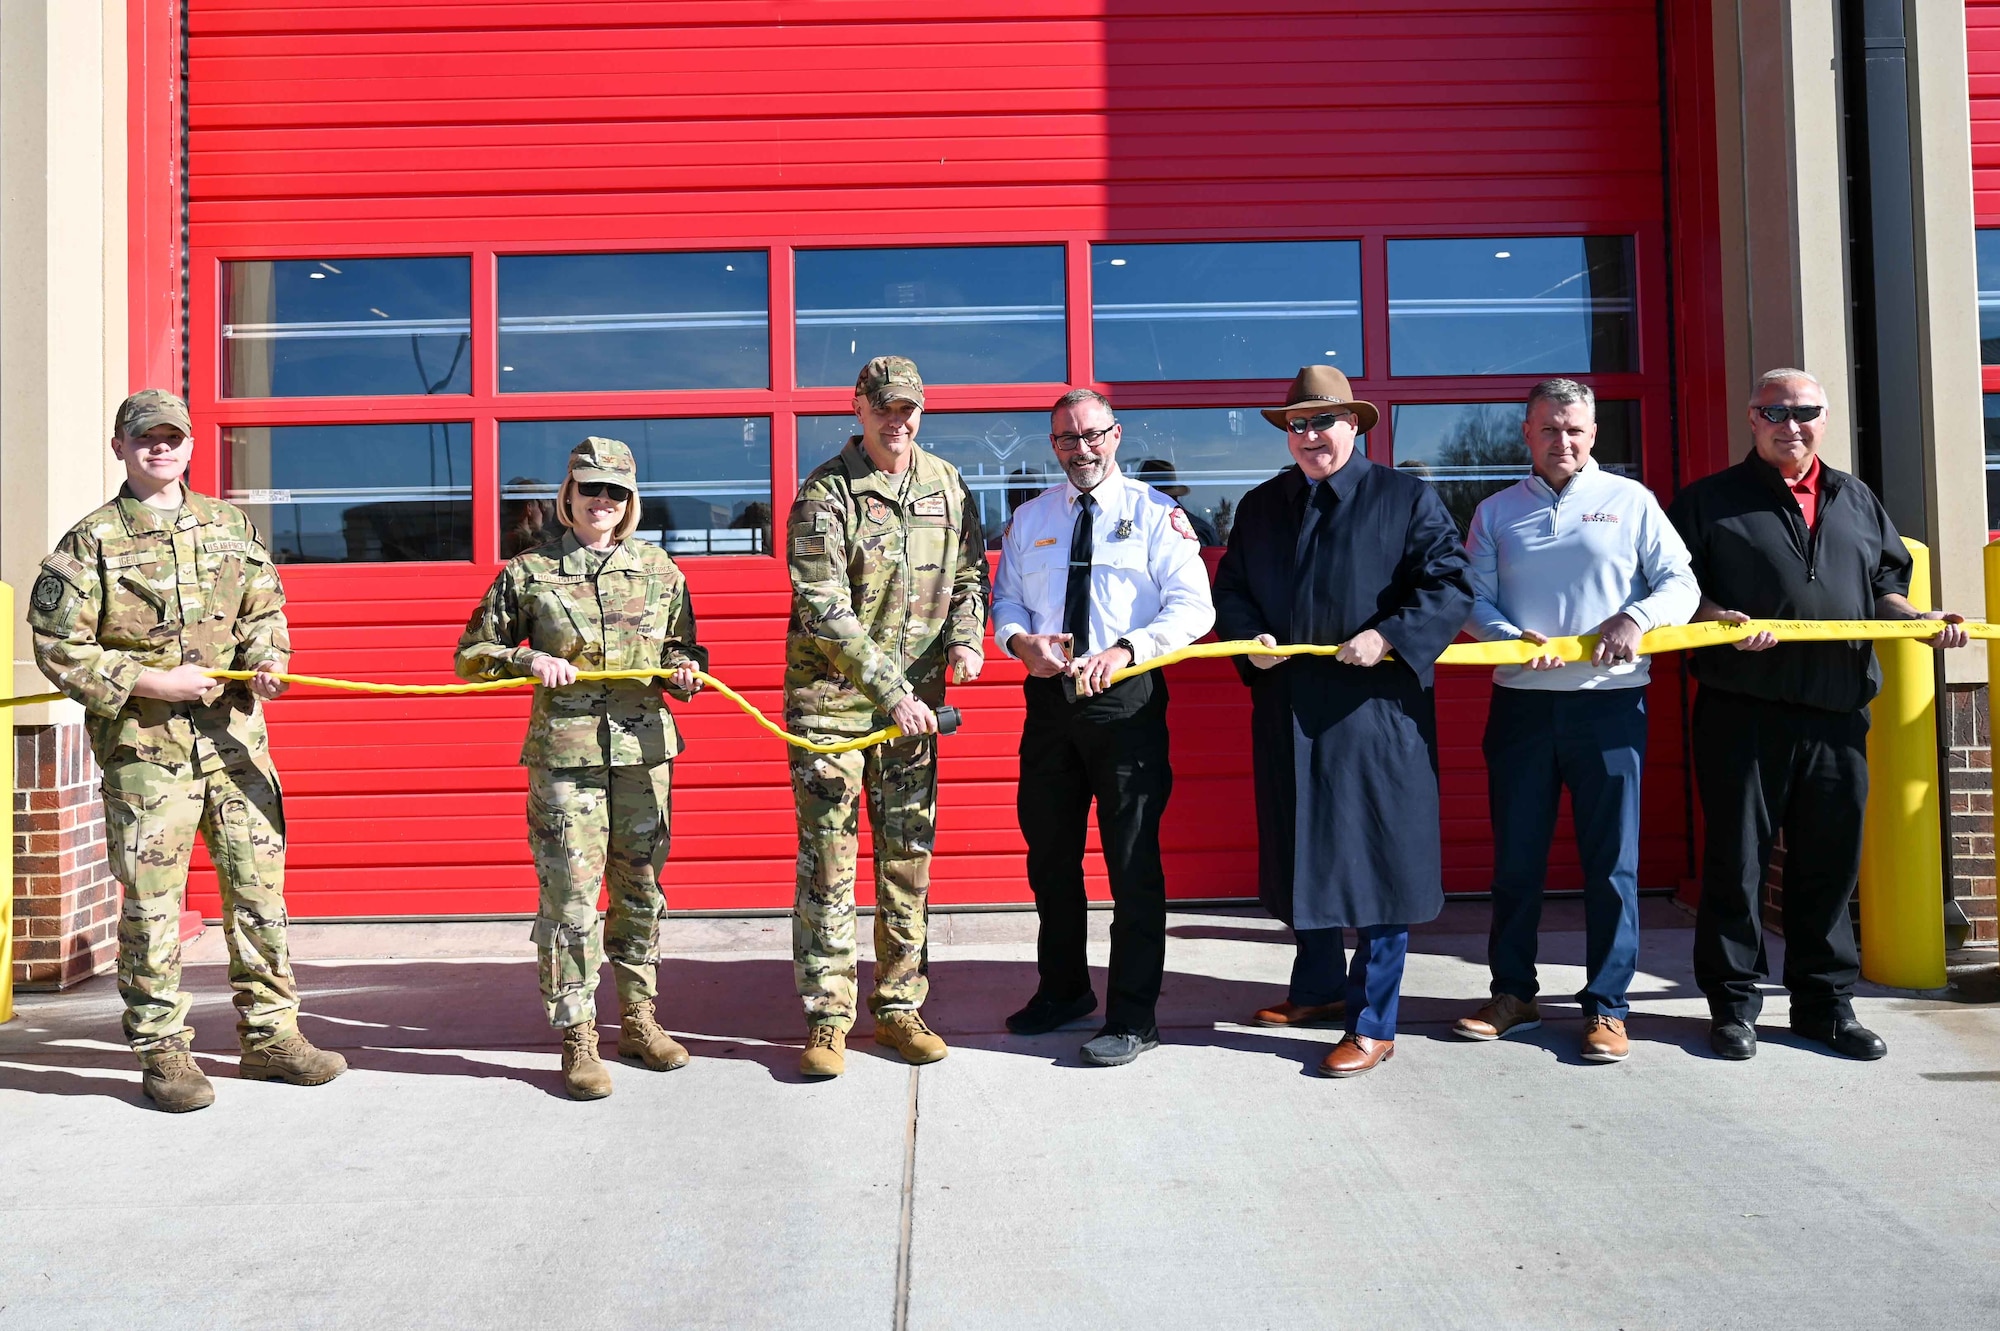 97th Air Mobility Wing (AMW) leadership and members of the Military Affairs Committee untwist a hose to commemorate the opening of the headquarters fire station at Altus Air Force Base, Oklahoma, Dec. 1, 2023. The new station will provide aircraft crash rescue and firefighting services, as well as firefighting equipment, a fire alarm system, and an emergency communications sensor center. (U.S. Air Force photo by Airman 1st Class Kari Degraffenreed)